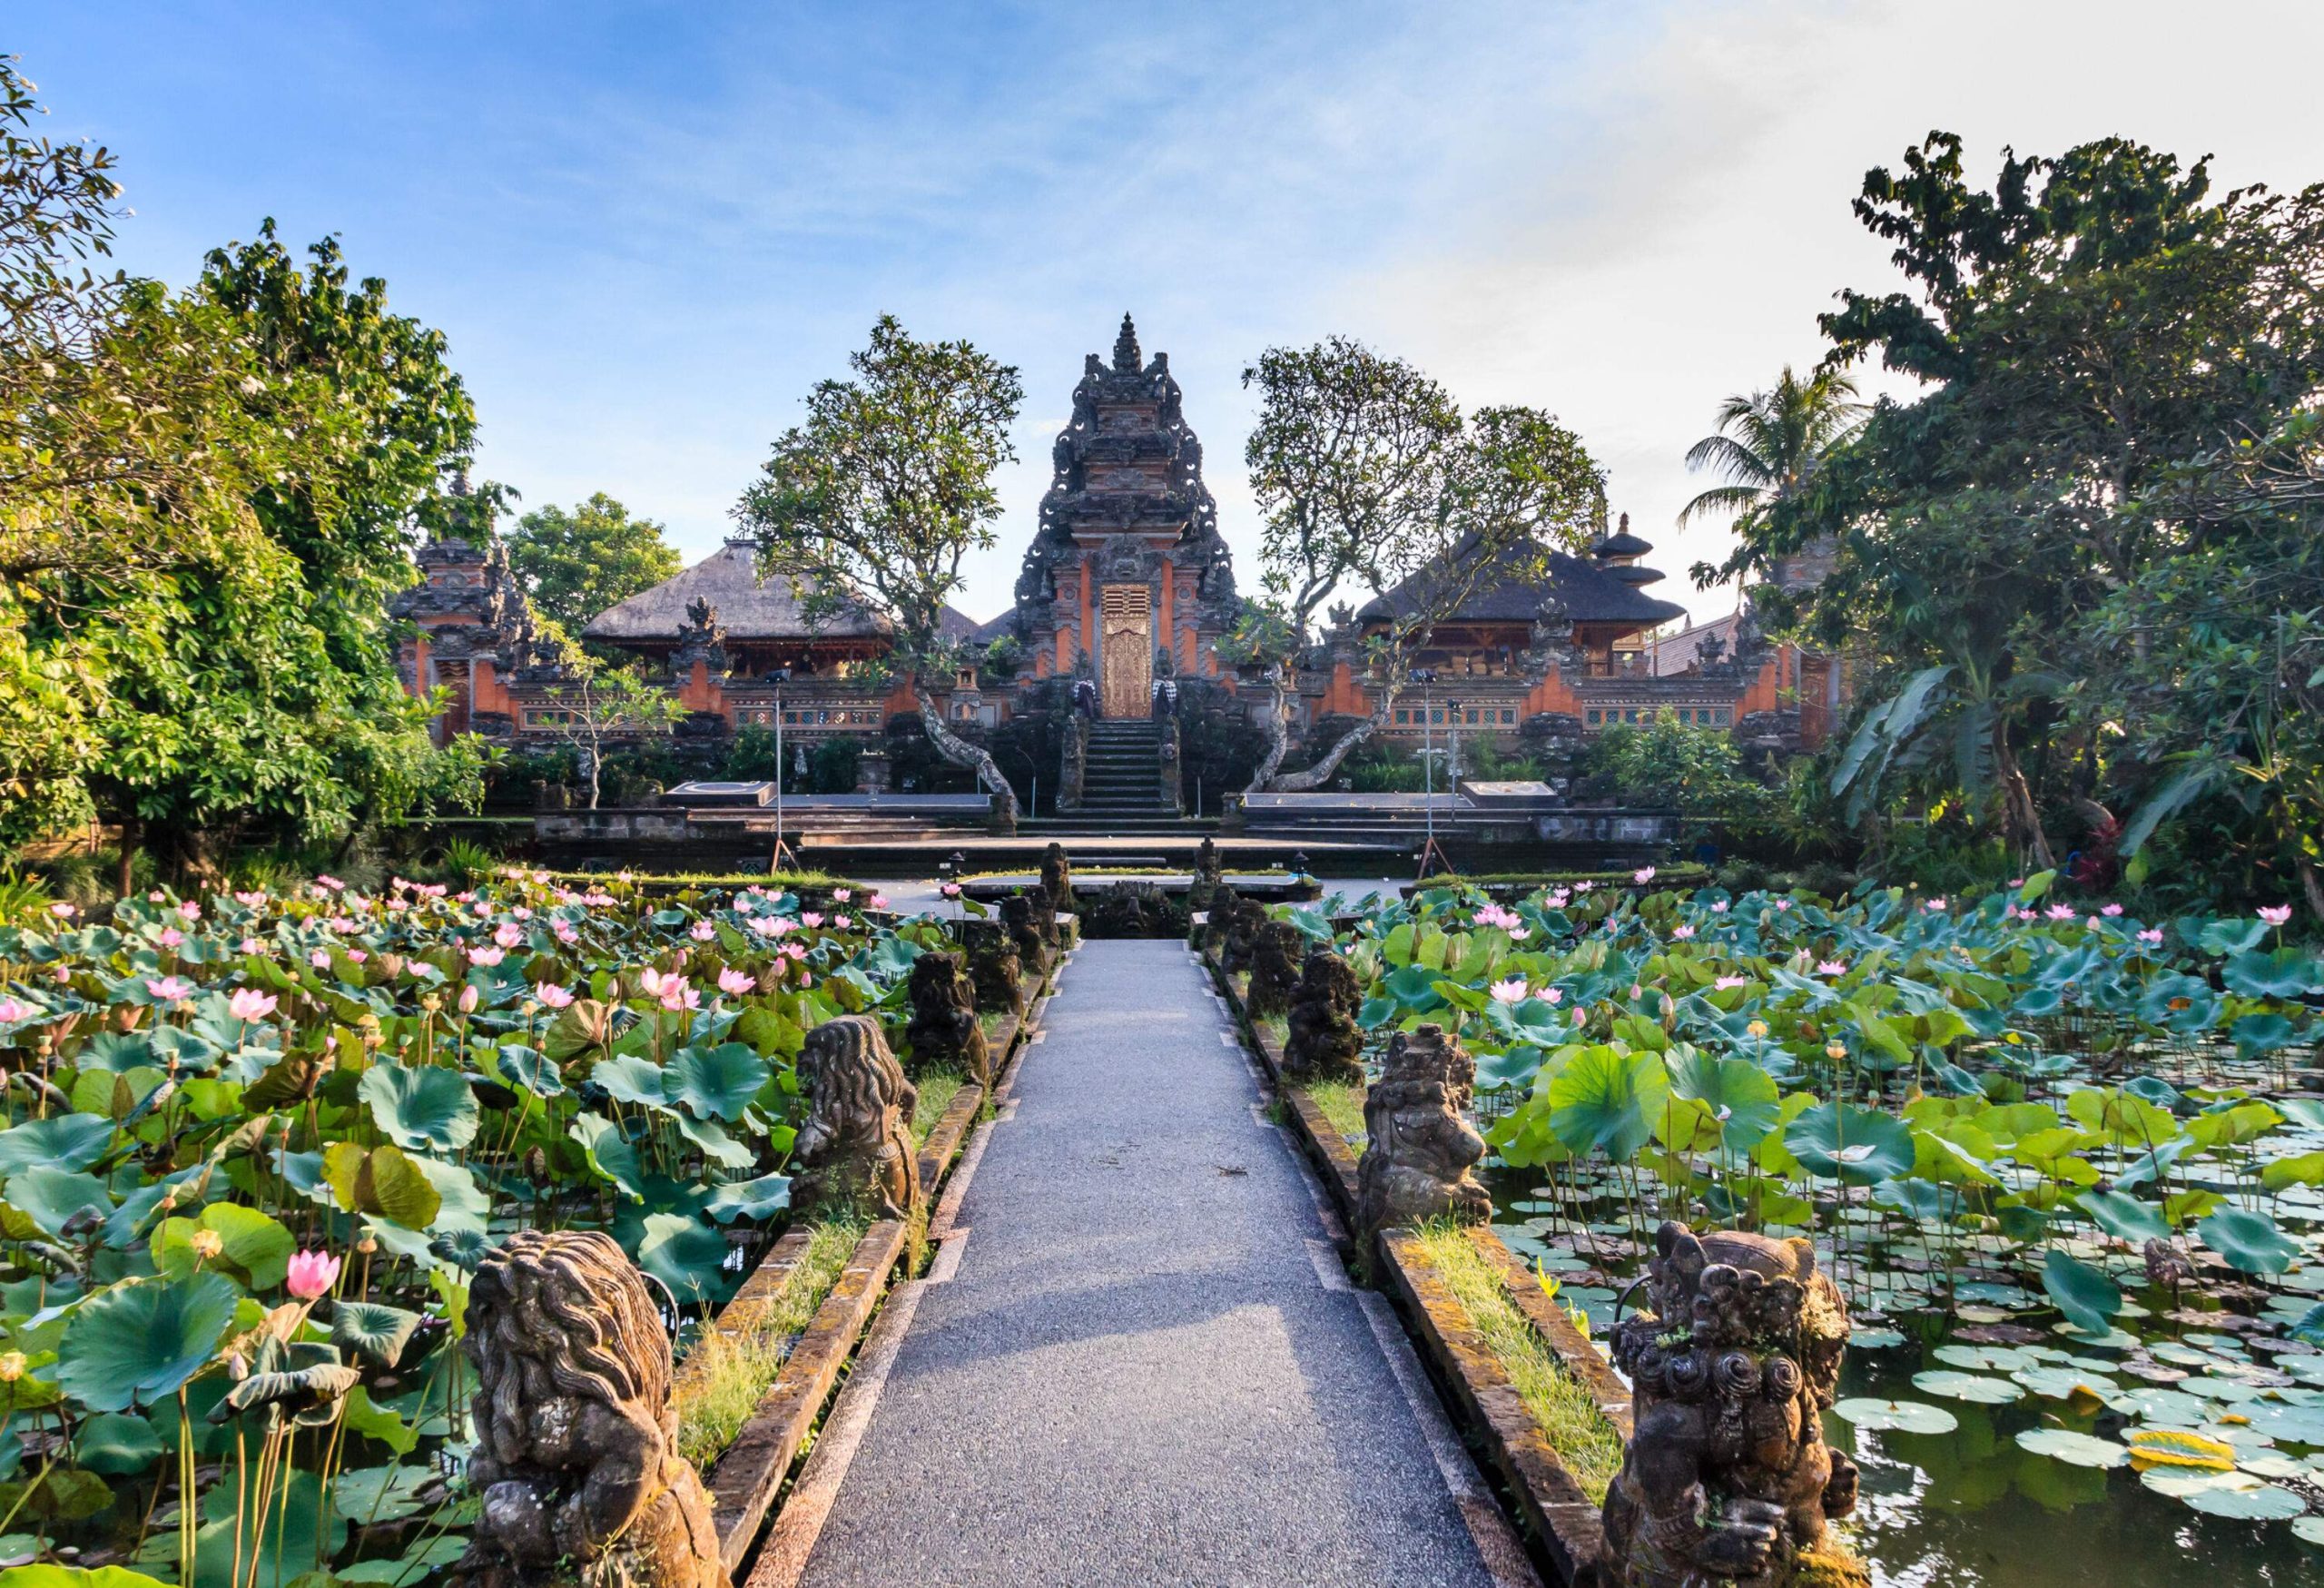 A lotus garden surrounds a walkway lined with mythical creatures that leads to the stairs of a tall gateway with golden doors situated between two cottages.